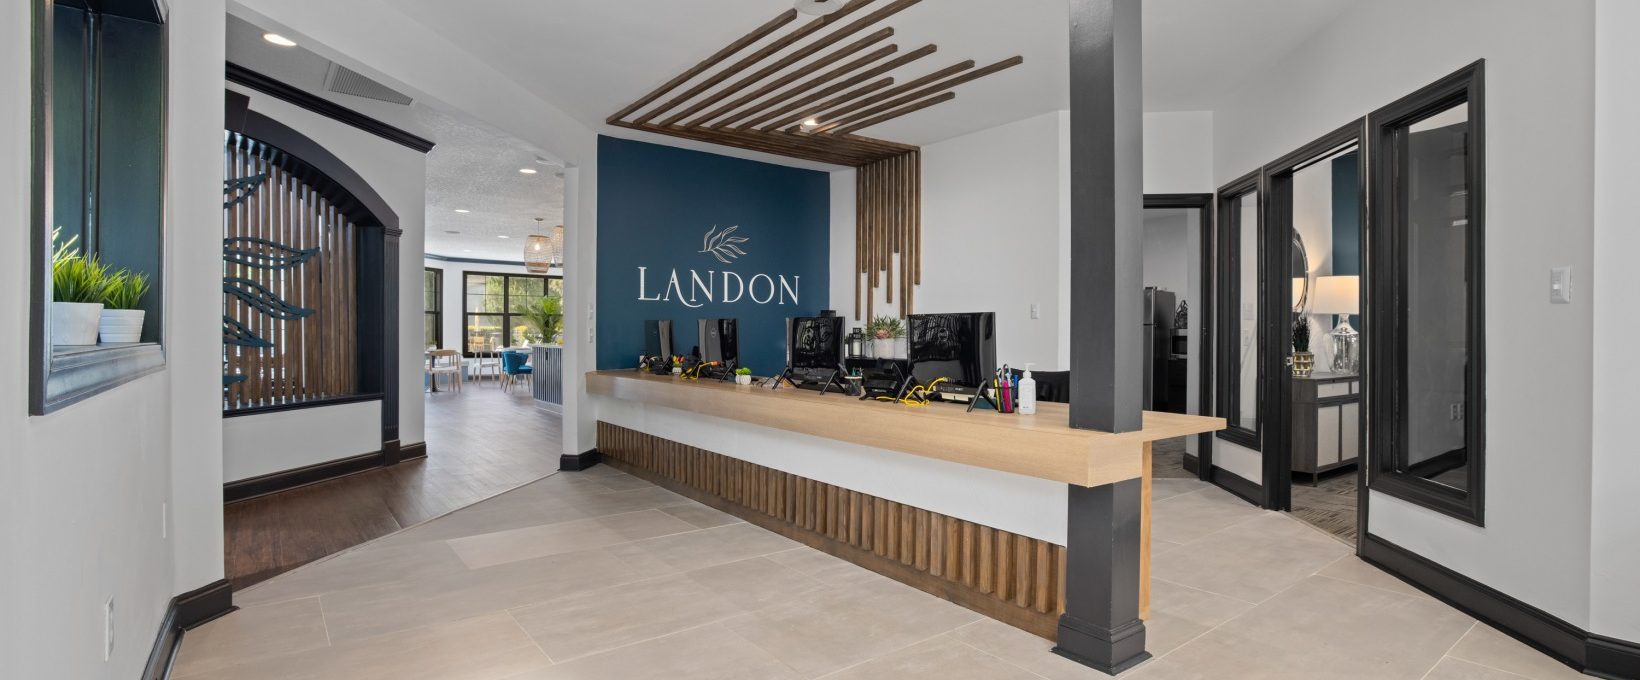 the reception area of a hotel with a large sign on the wall at The Landon